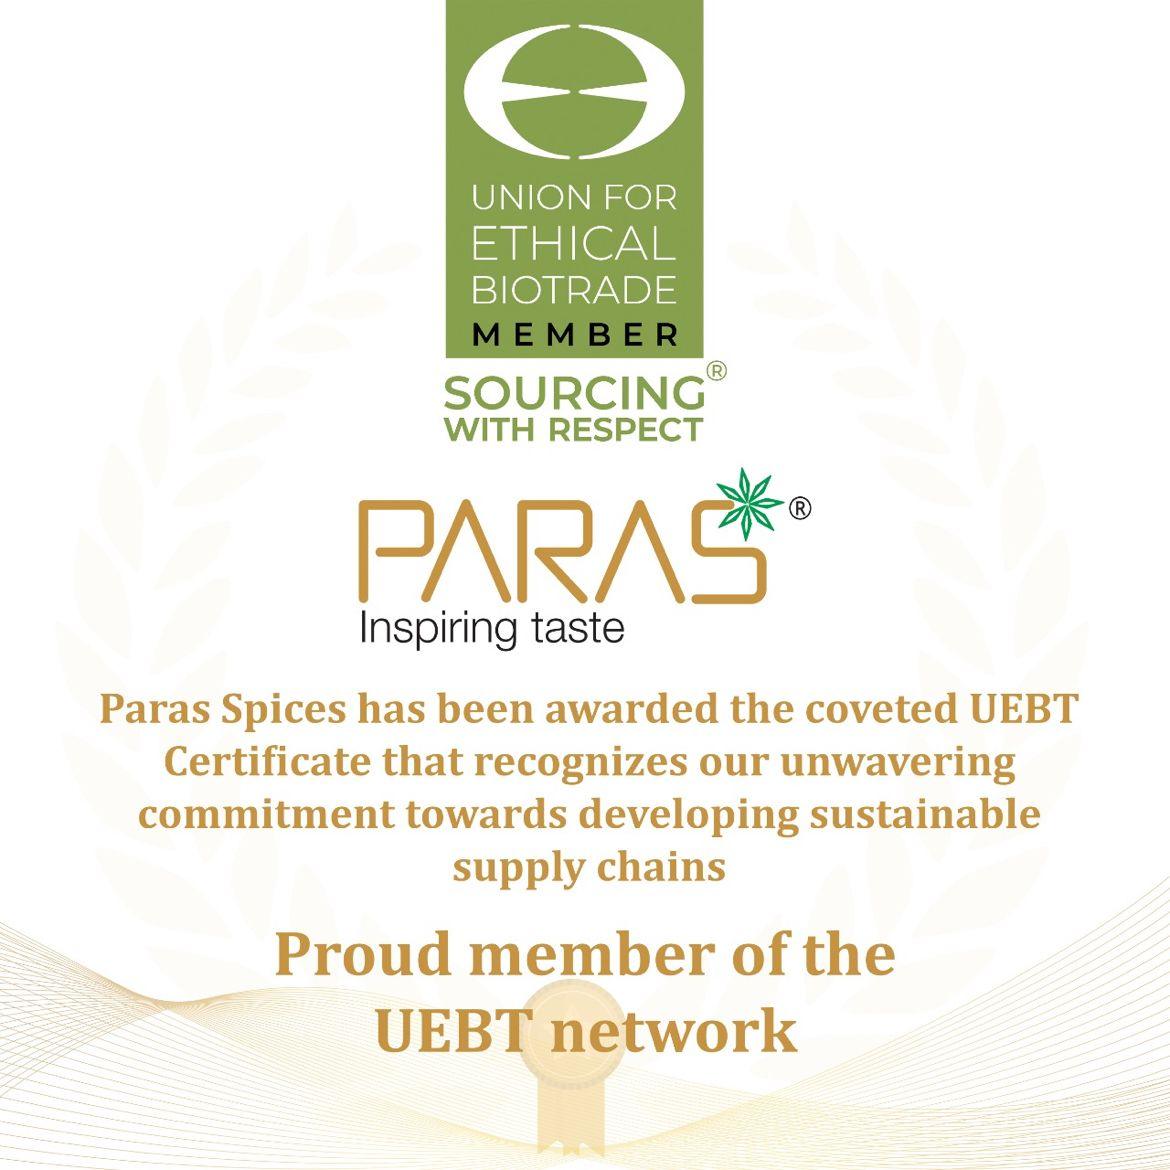 UEBT Network - Orika Spices India